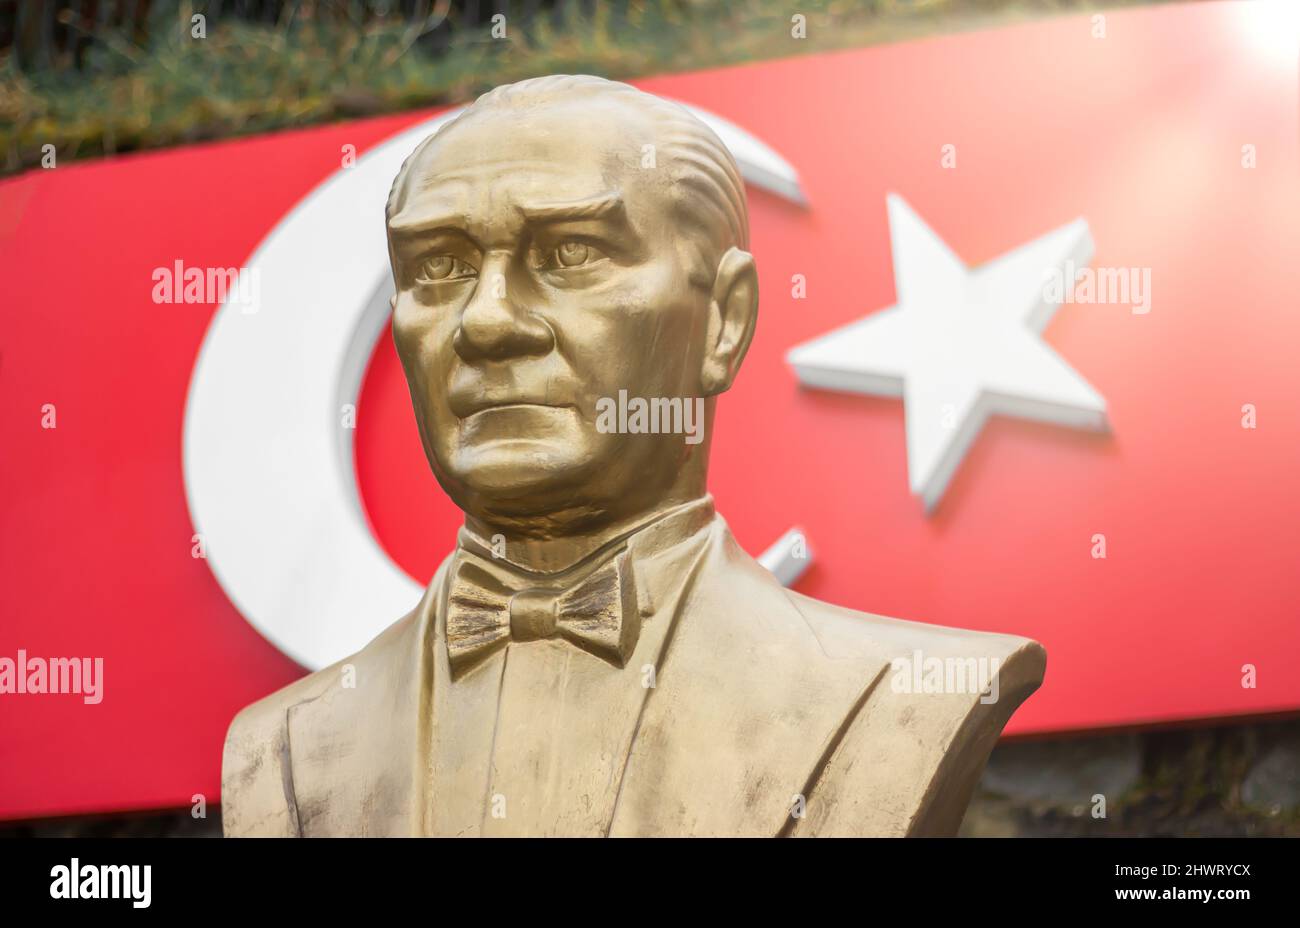 Ataturk Bust with Turkish flag on background,  Statue of Ataturk, The first president and founder of Republic Turkey Stock Photo